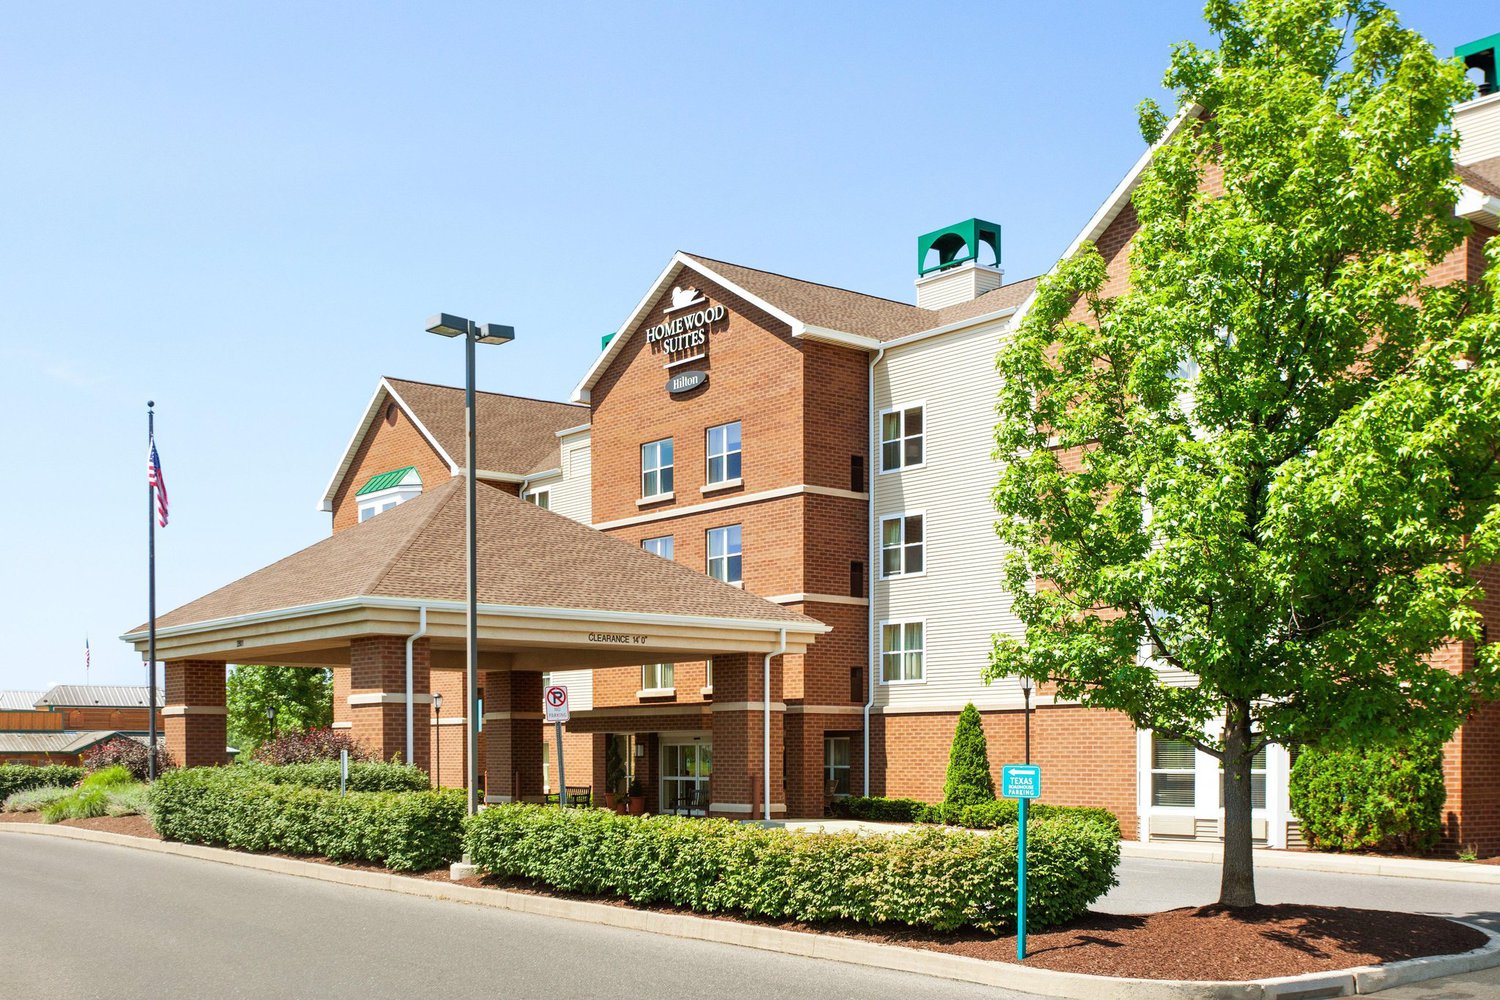 Homewood Suites by Hilton Reading, Reading, PA Jobs | Hospitality Online